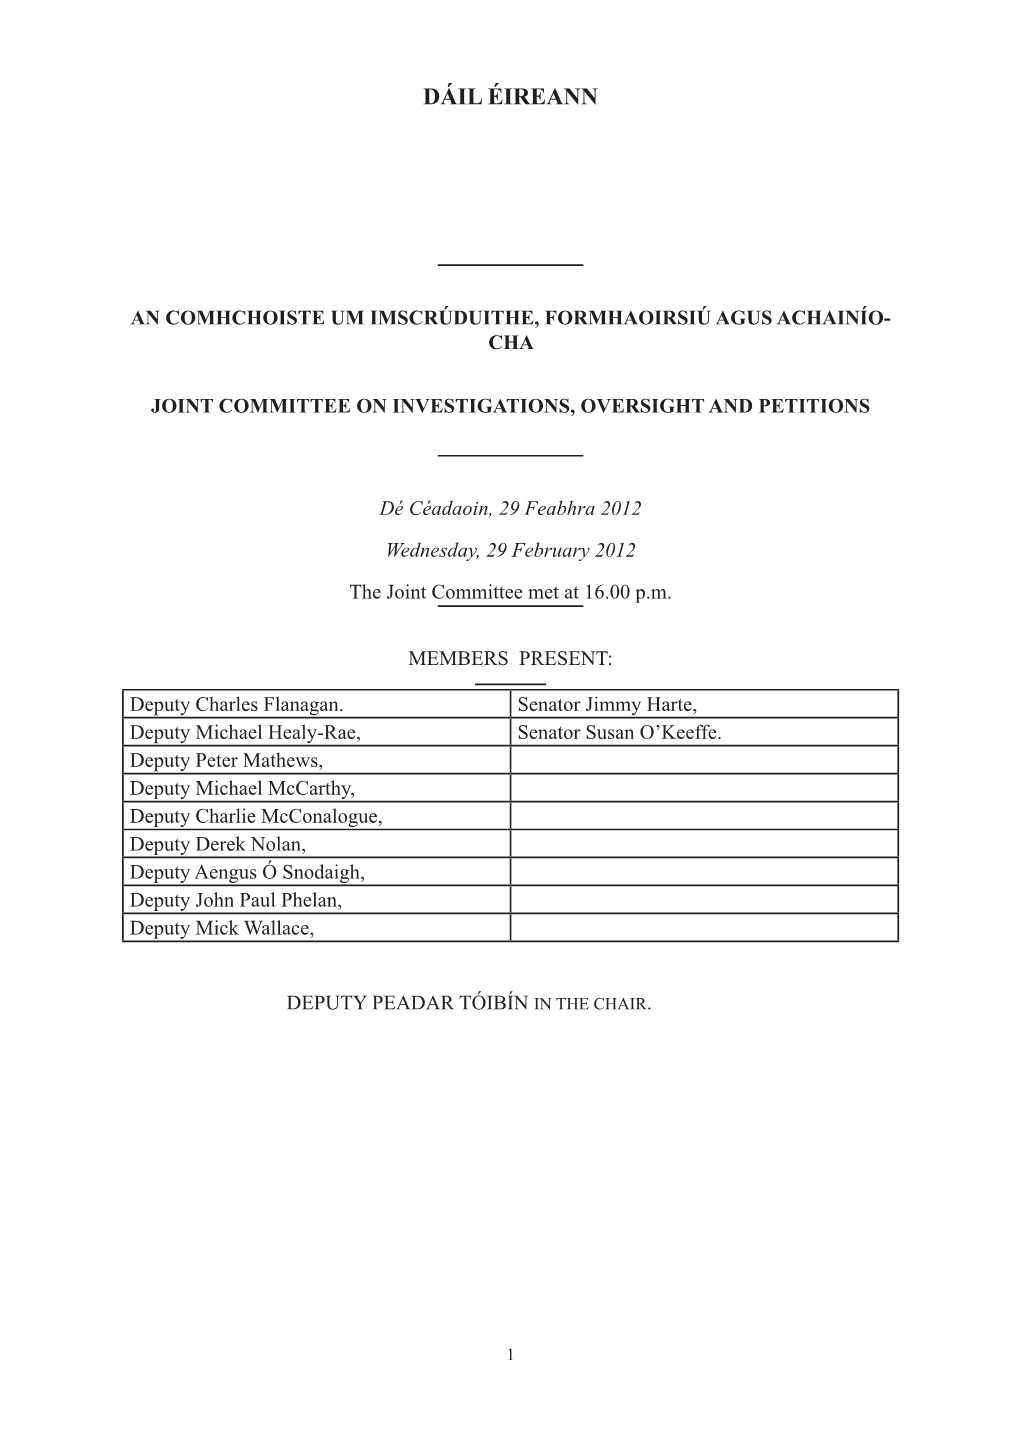 Transcript of Joint Committee on Investigations, Oversight and Petitions